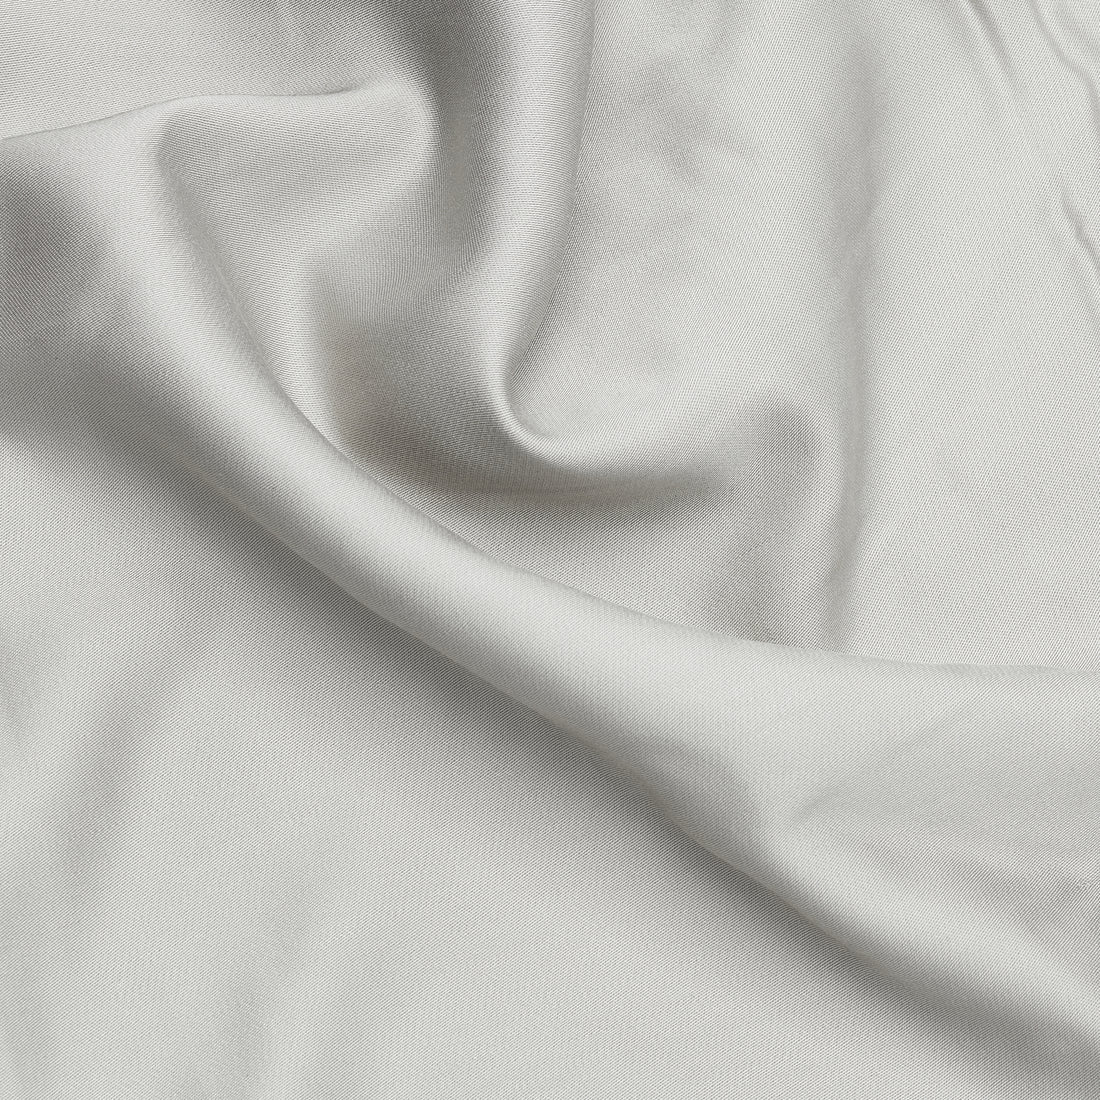 section of fabric